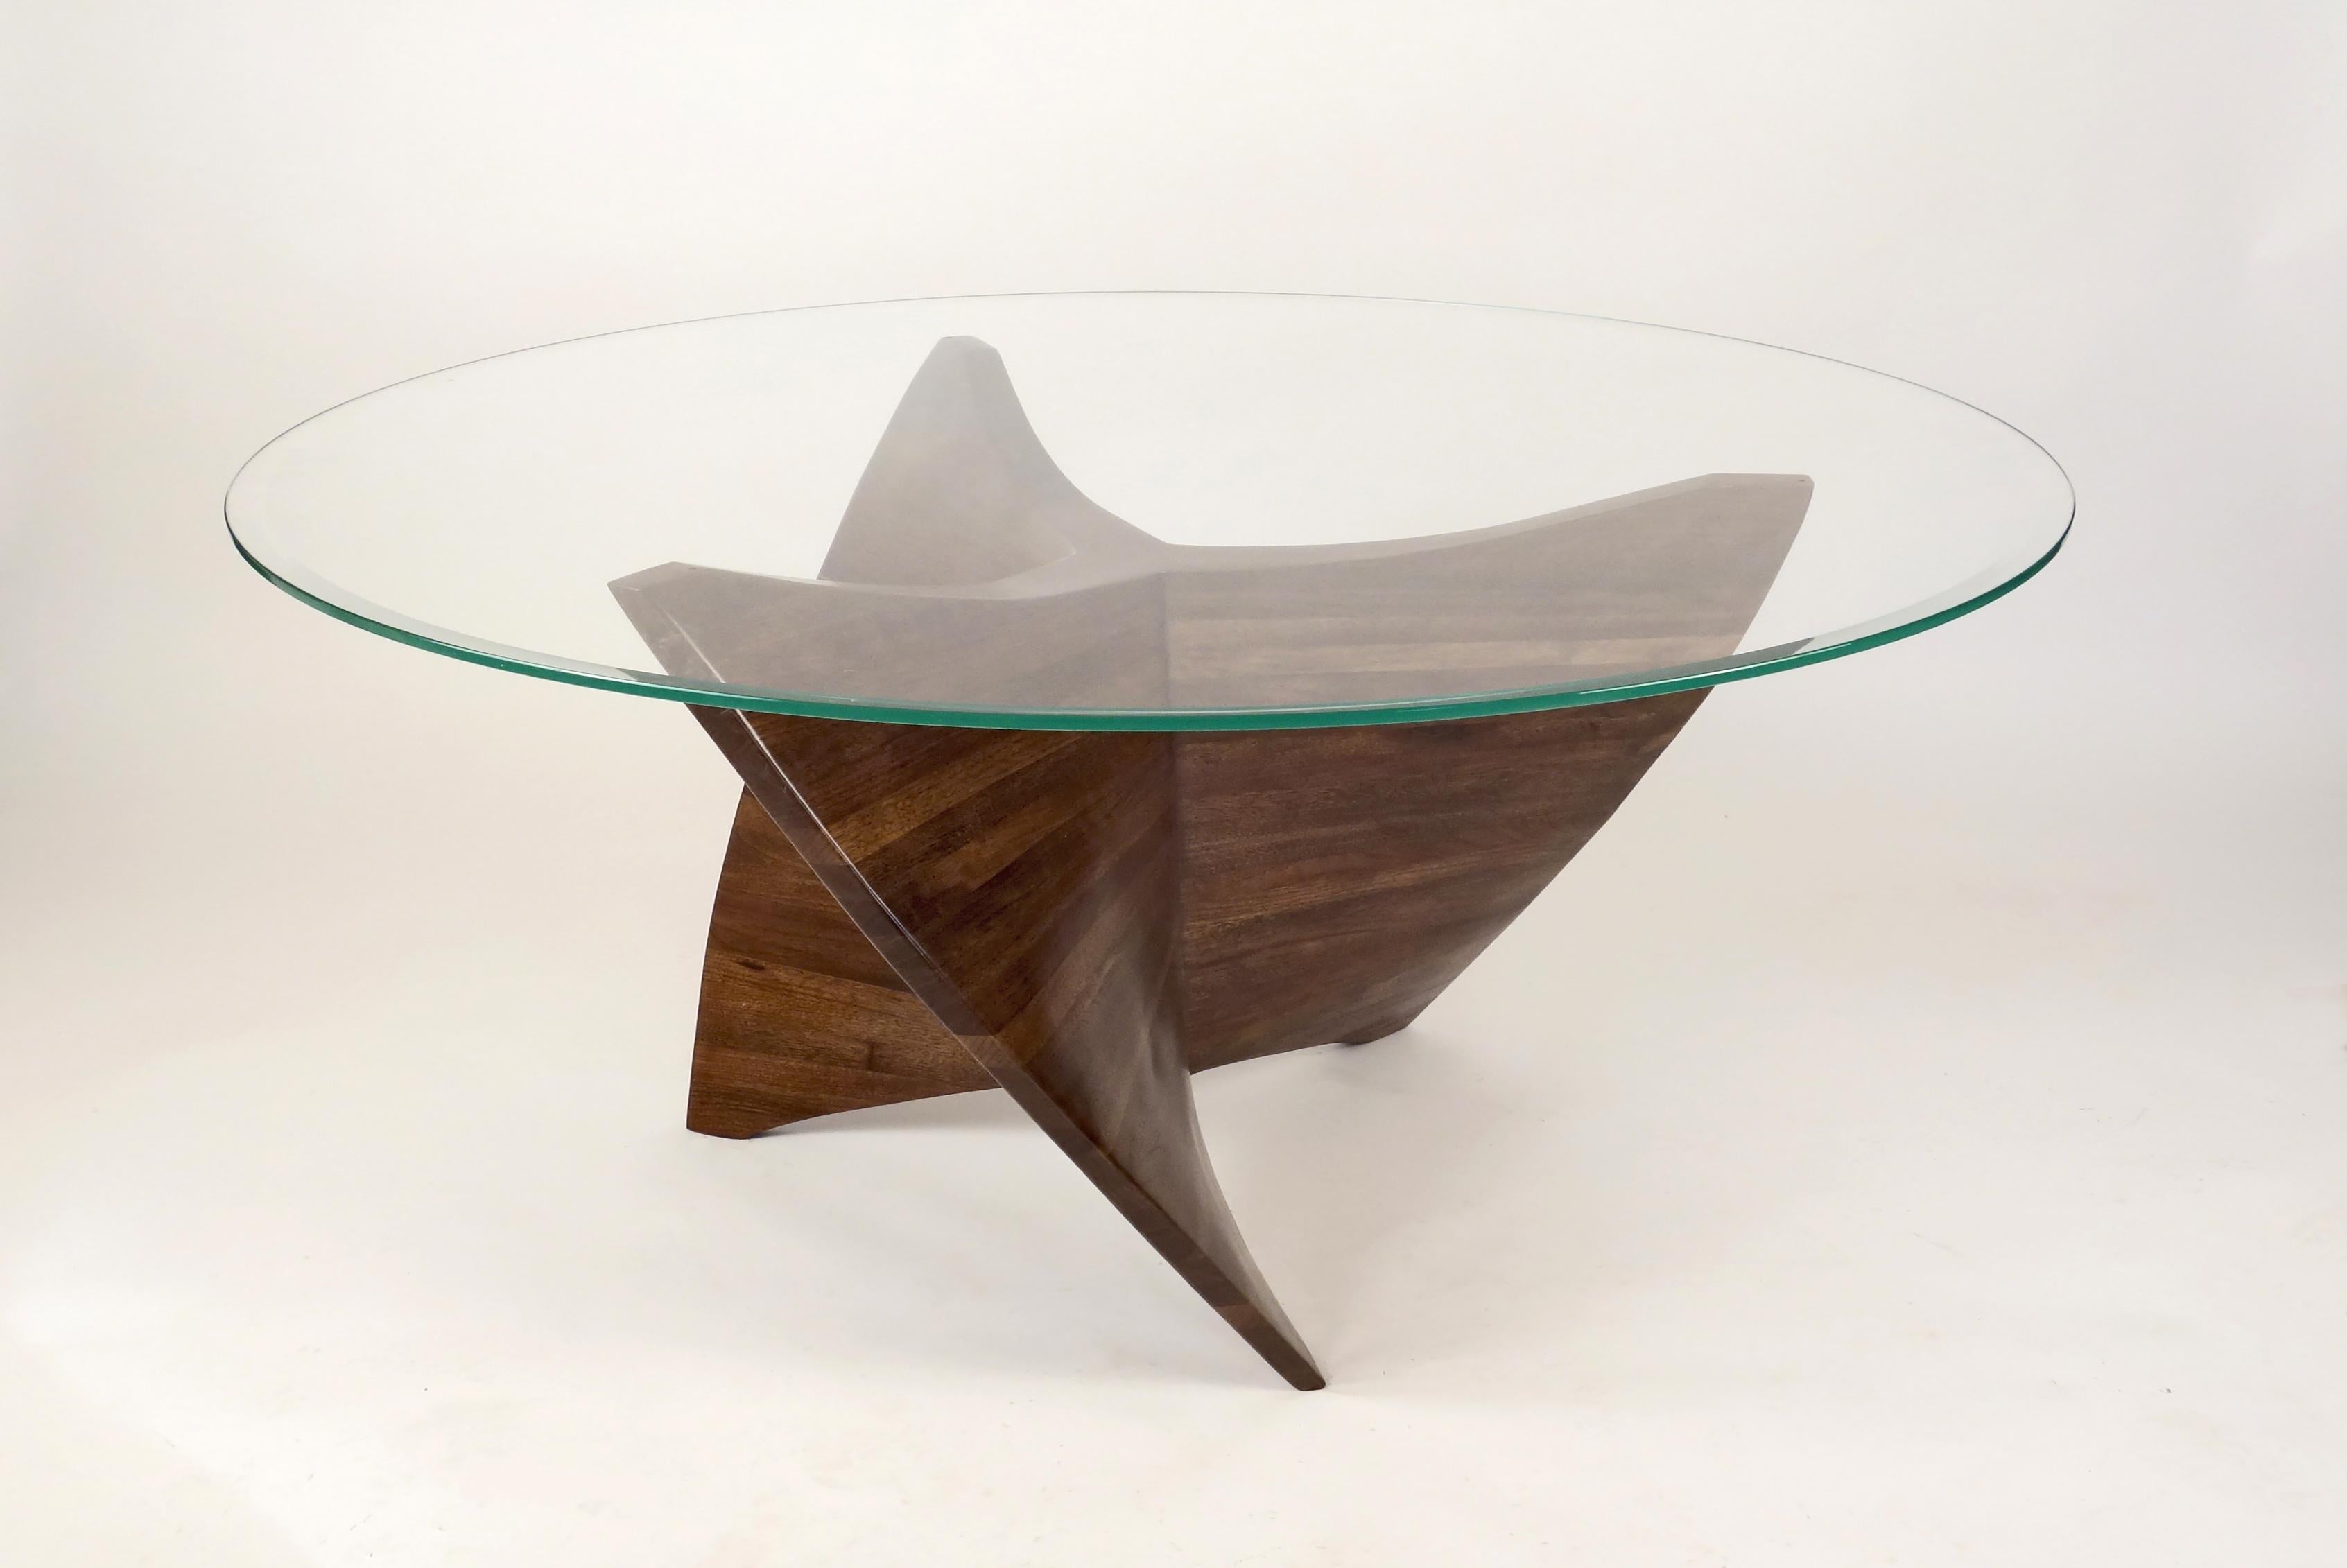 N3 Coffee Table by Aaron Scott
Dimensions: D 122 x W 122 x H 41 cm
Materials: Walnut, Glass.
Also available in other woods: bleached cherry, bleached walnut. 


Brooklyn-based designer Aaron Scott was raised in the mountains and forests of